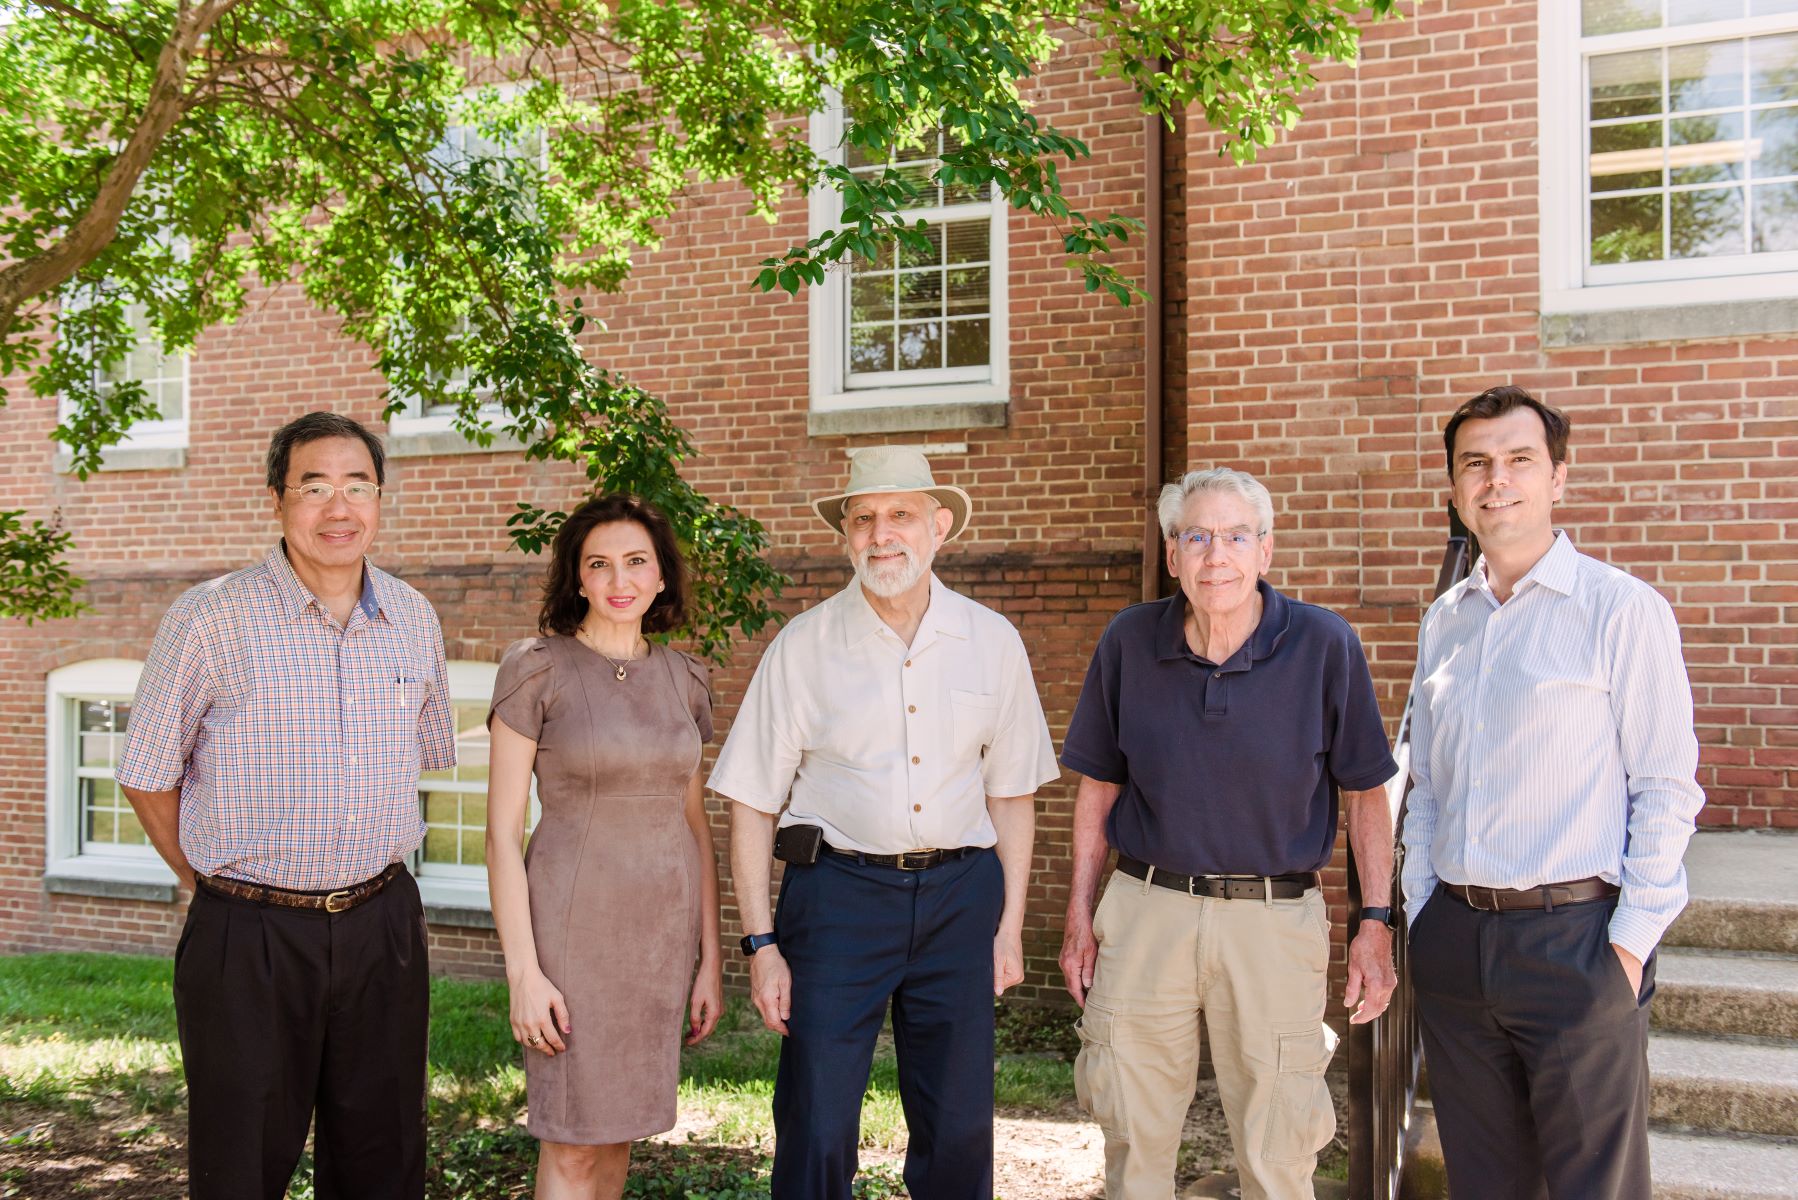 Five people stand in front of brick building and smile at camera.